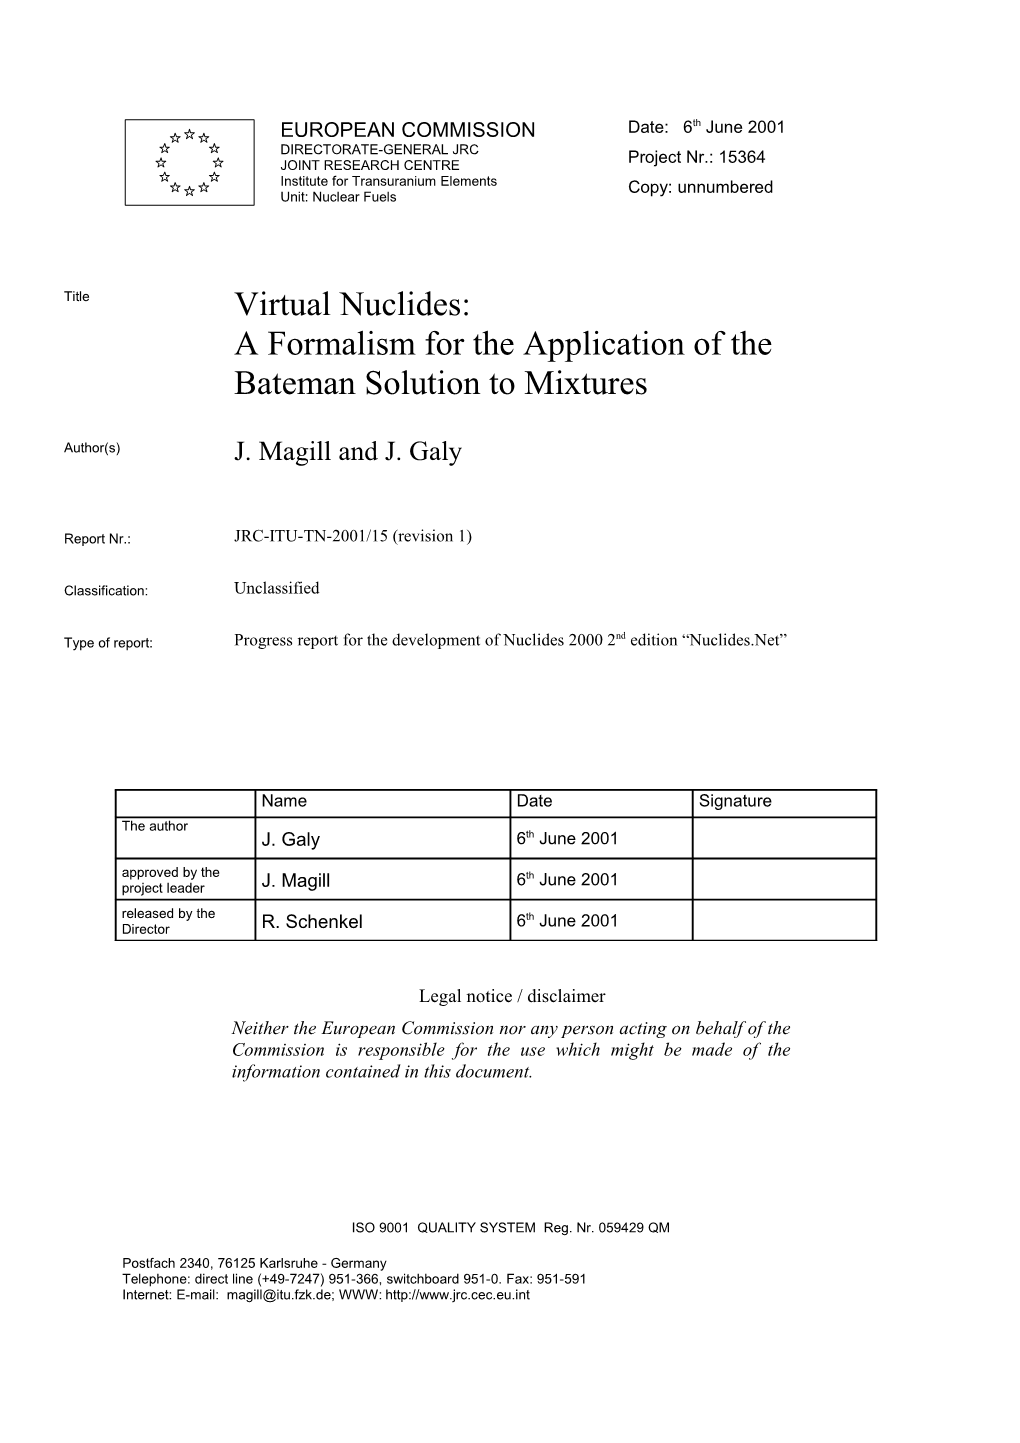 Virtual Nuclides: a Formalism for the Application of Bateman Type Equations to Mixtures